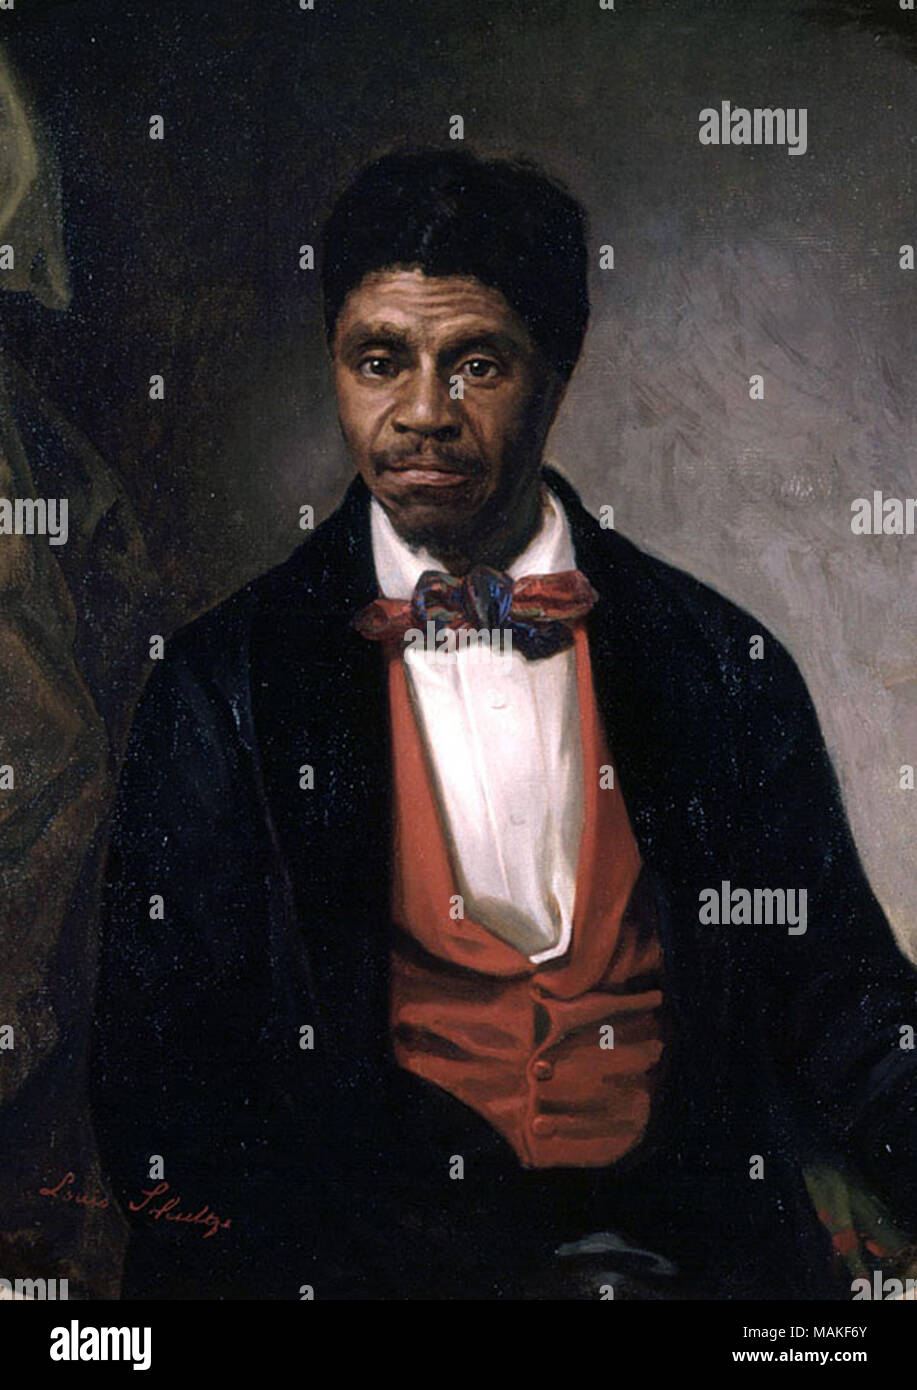 . Dred Scott (1795  ? 1858), plaintiff in the infamous Dred Scott v. Sandford (1857) case at the Supreme Court of the United States, commissioned by a 'group of Negro citizens' and presented to the Missouri Historical Society, St. Louis, in 1888.[2][3]  . 1888 Stock Photo